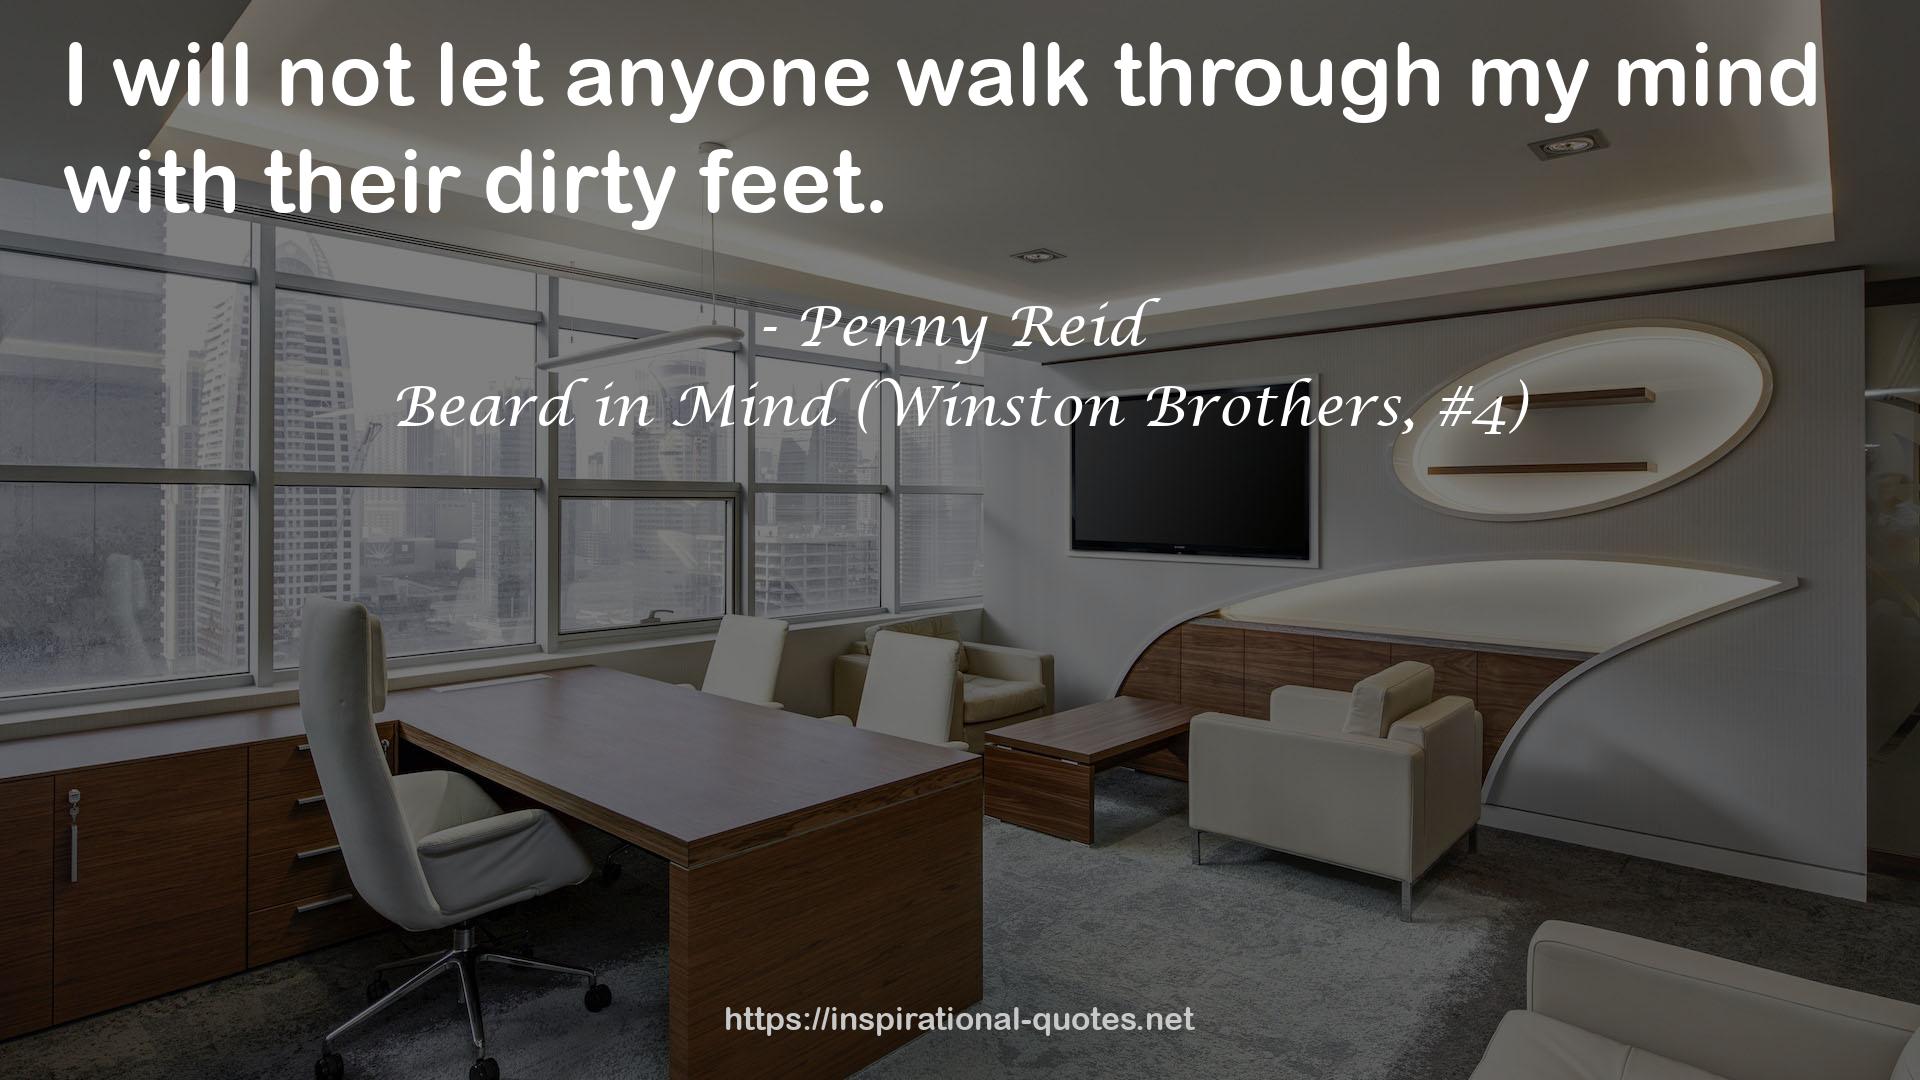 Beard in Mind (Winston Brothers, #4) QUOTES